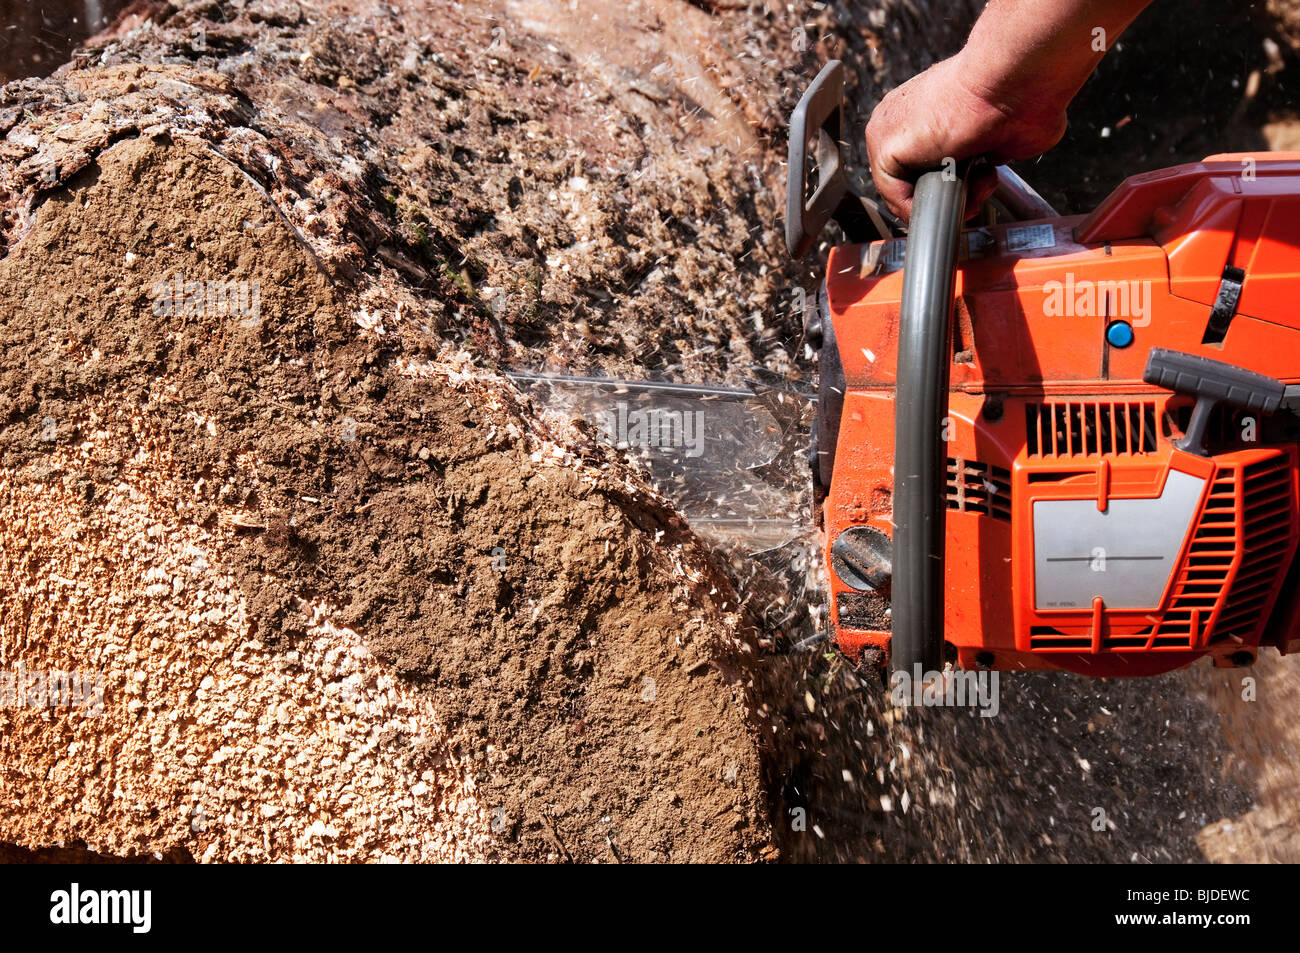 Worker's hand and chain saw. Stock Photo